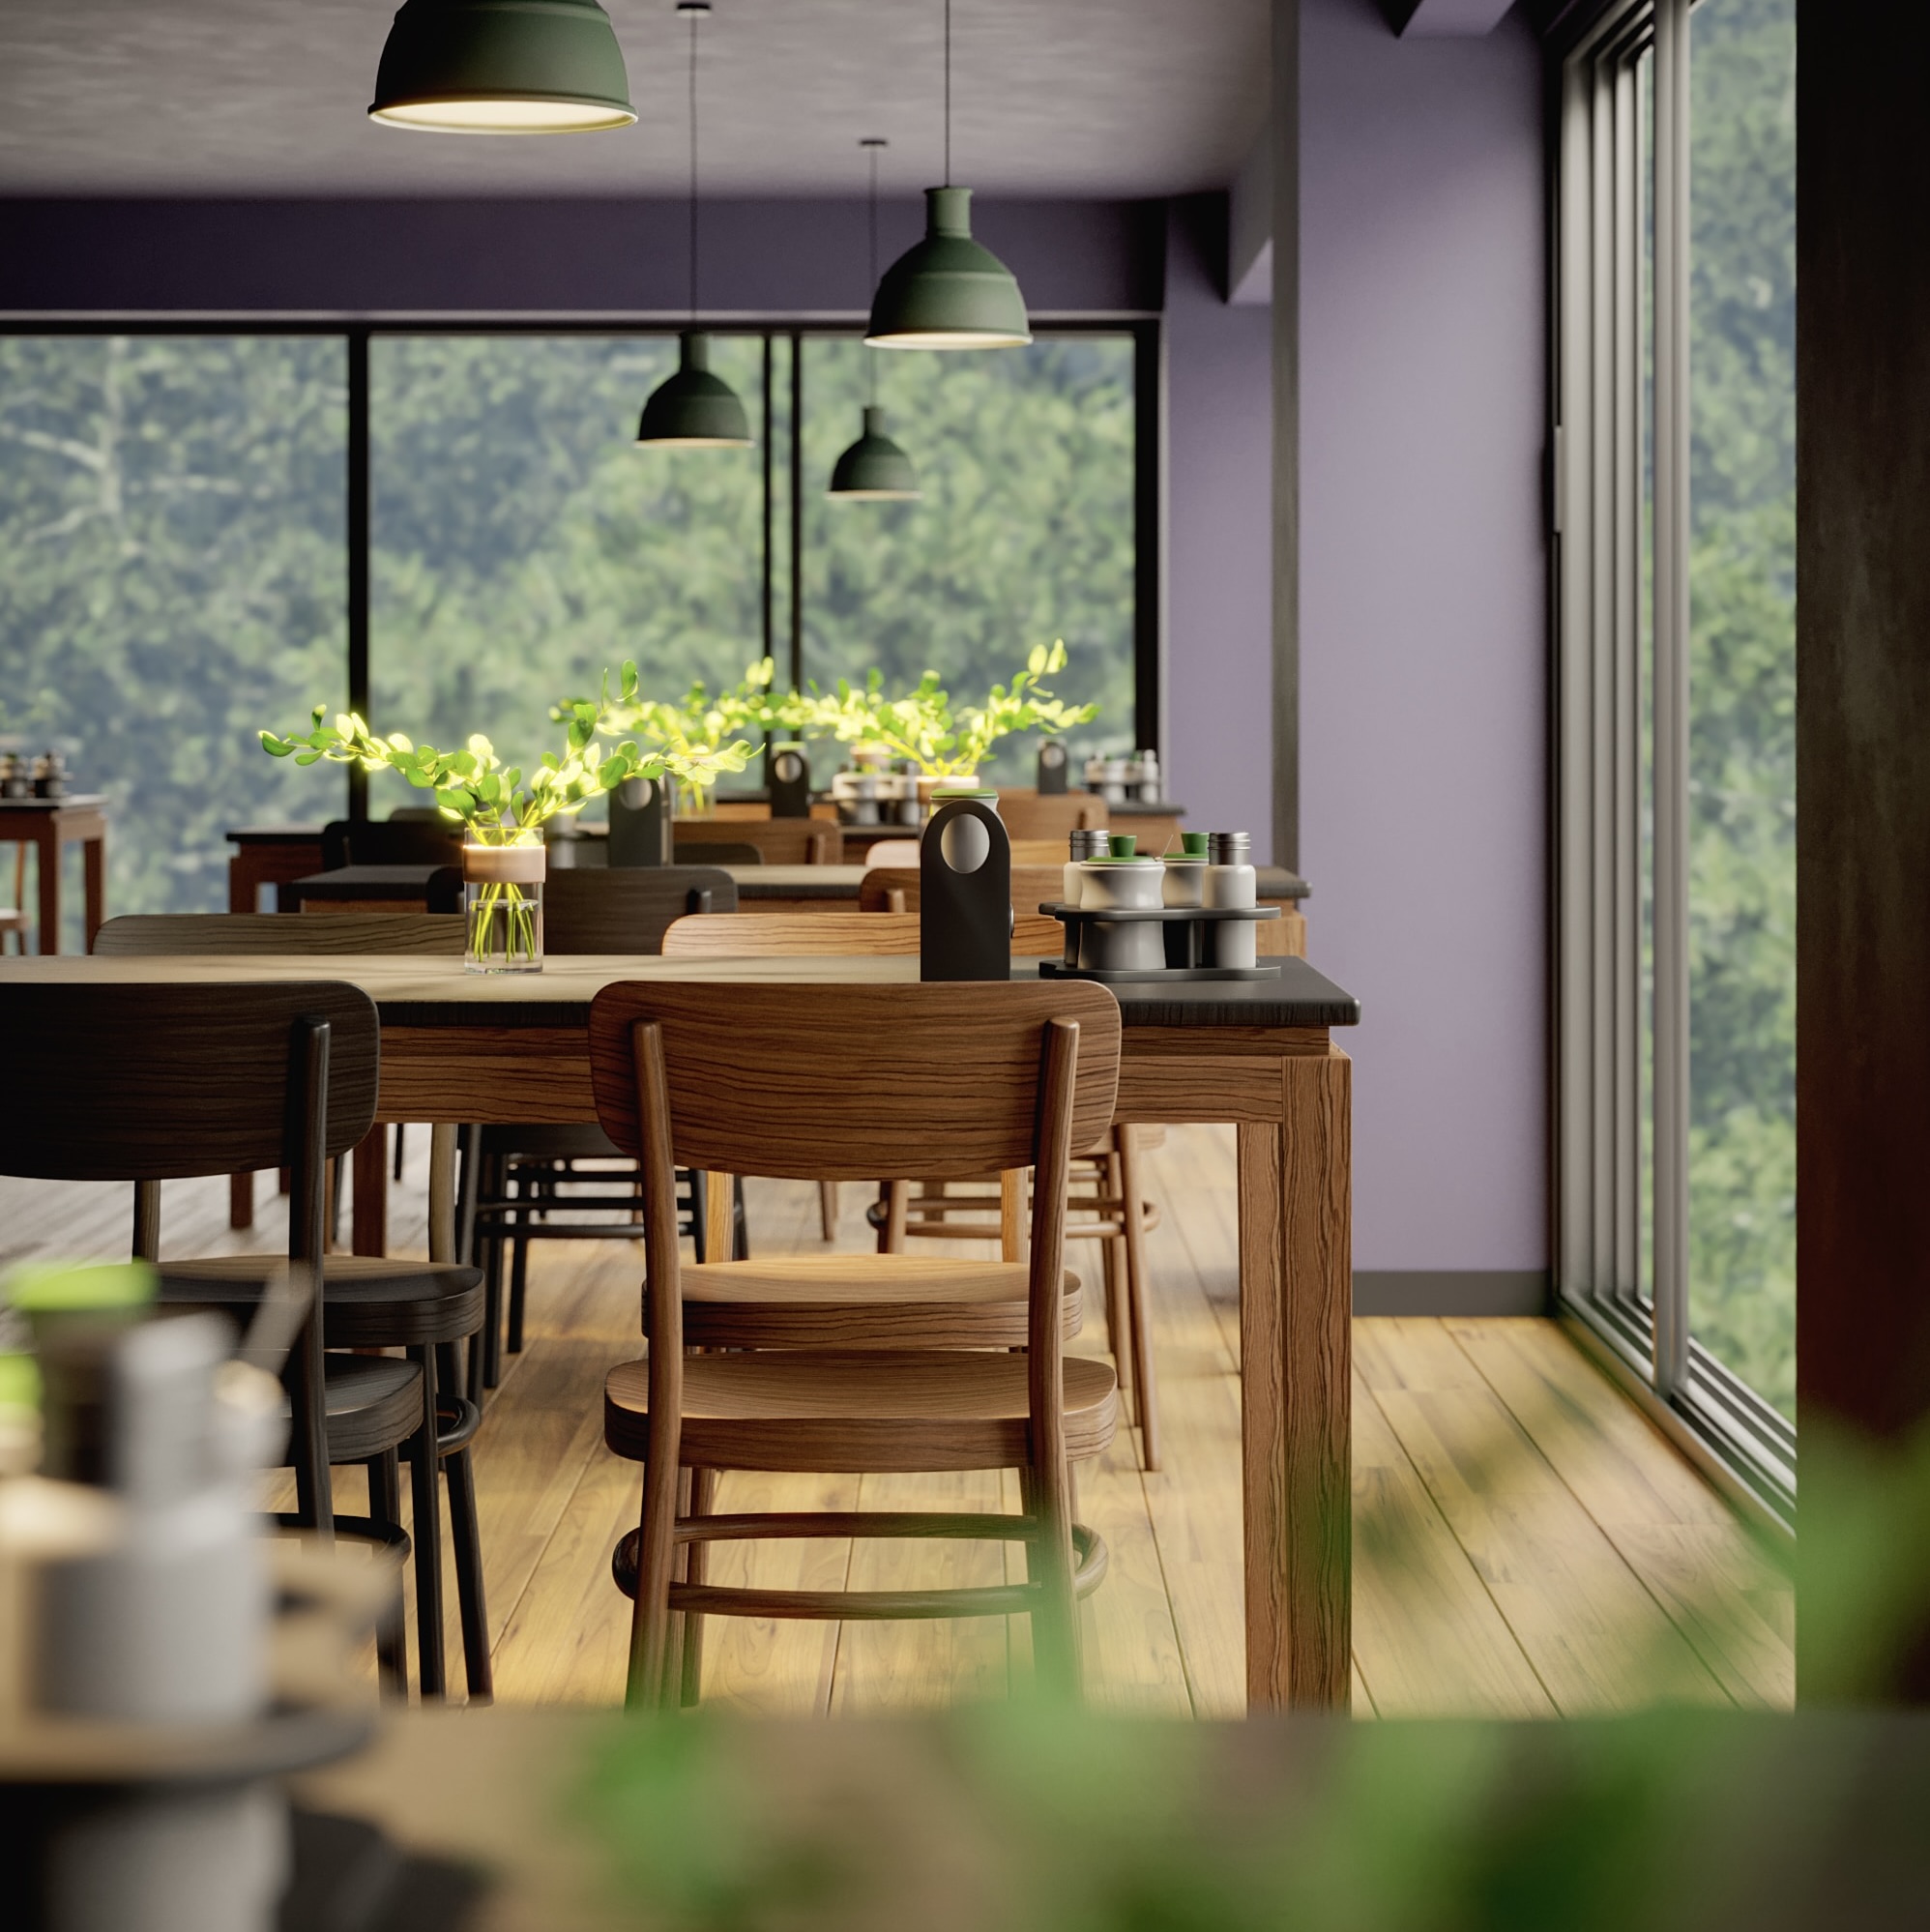 A kitchen with biophilic design elements like plants, large windows and natural light